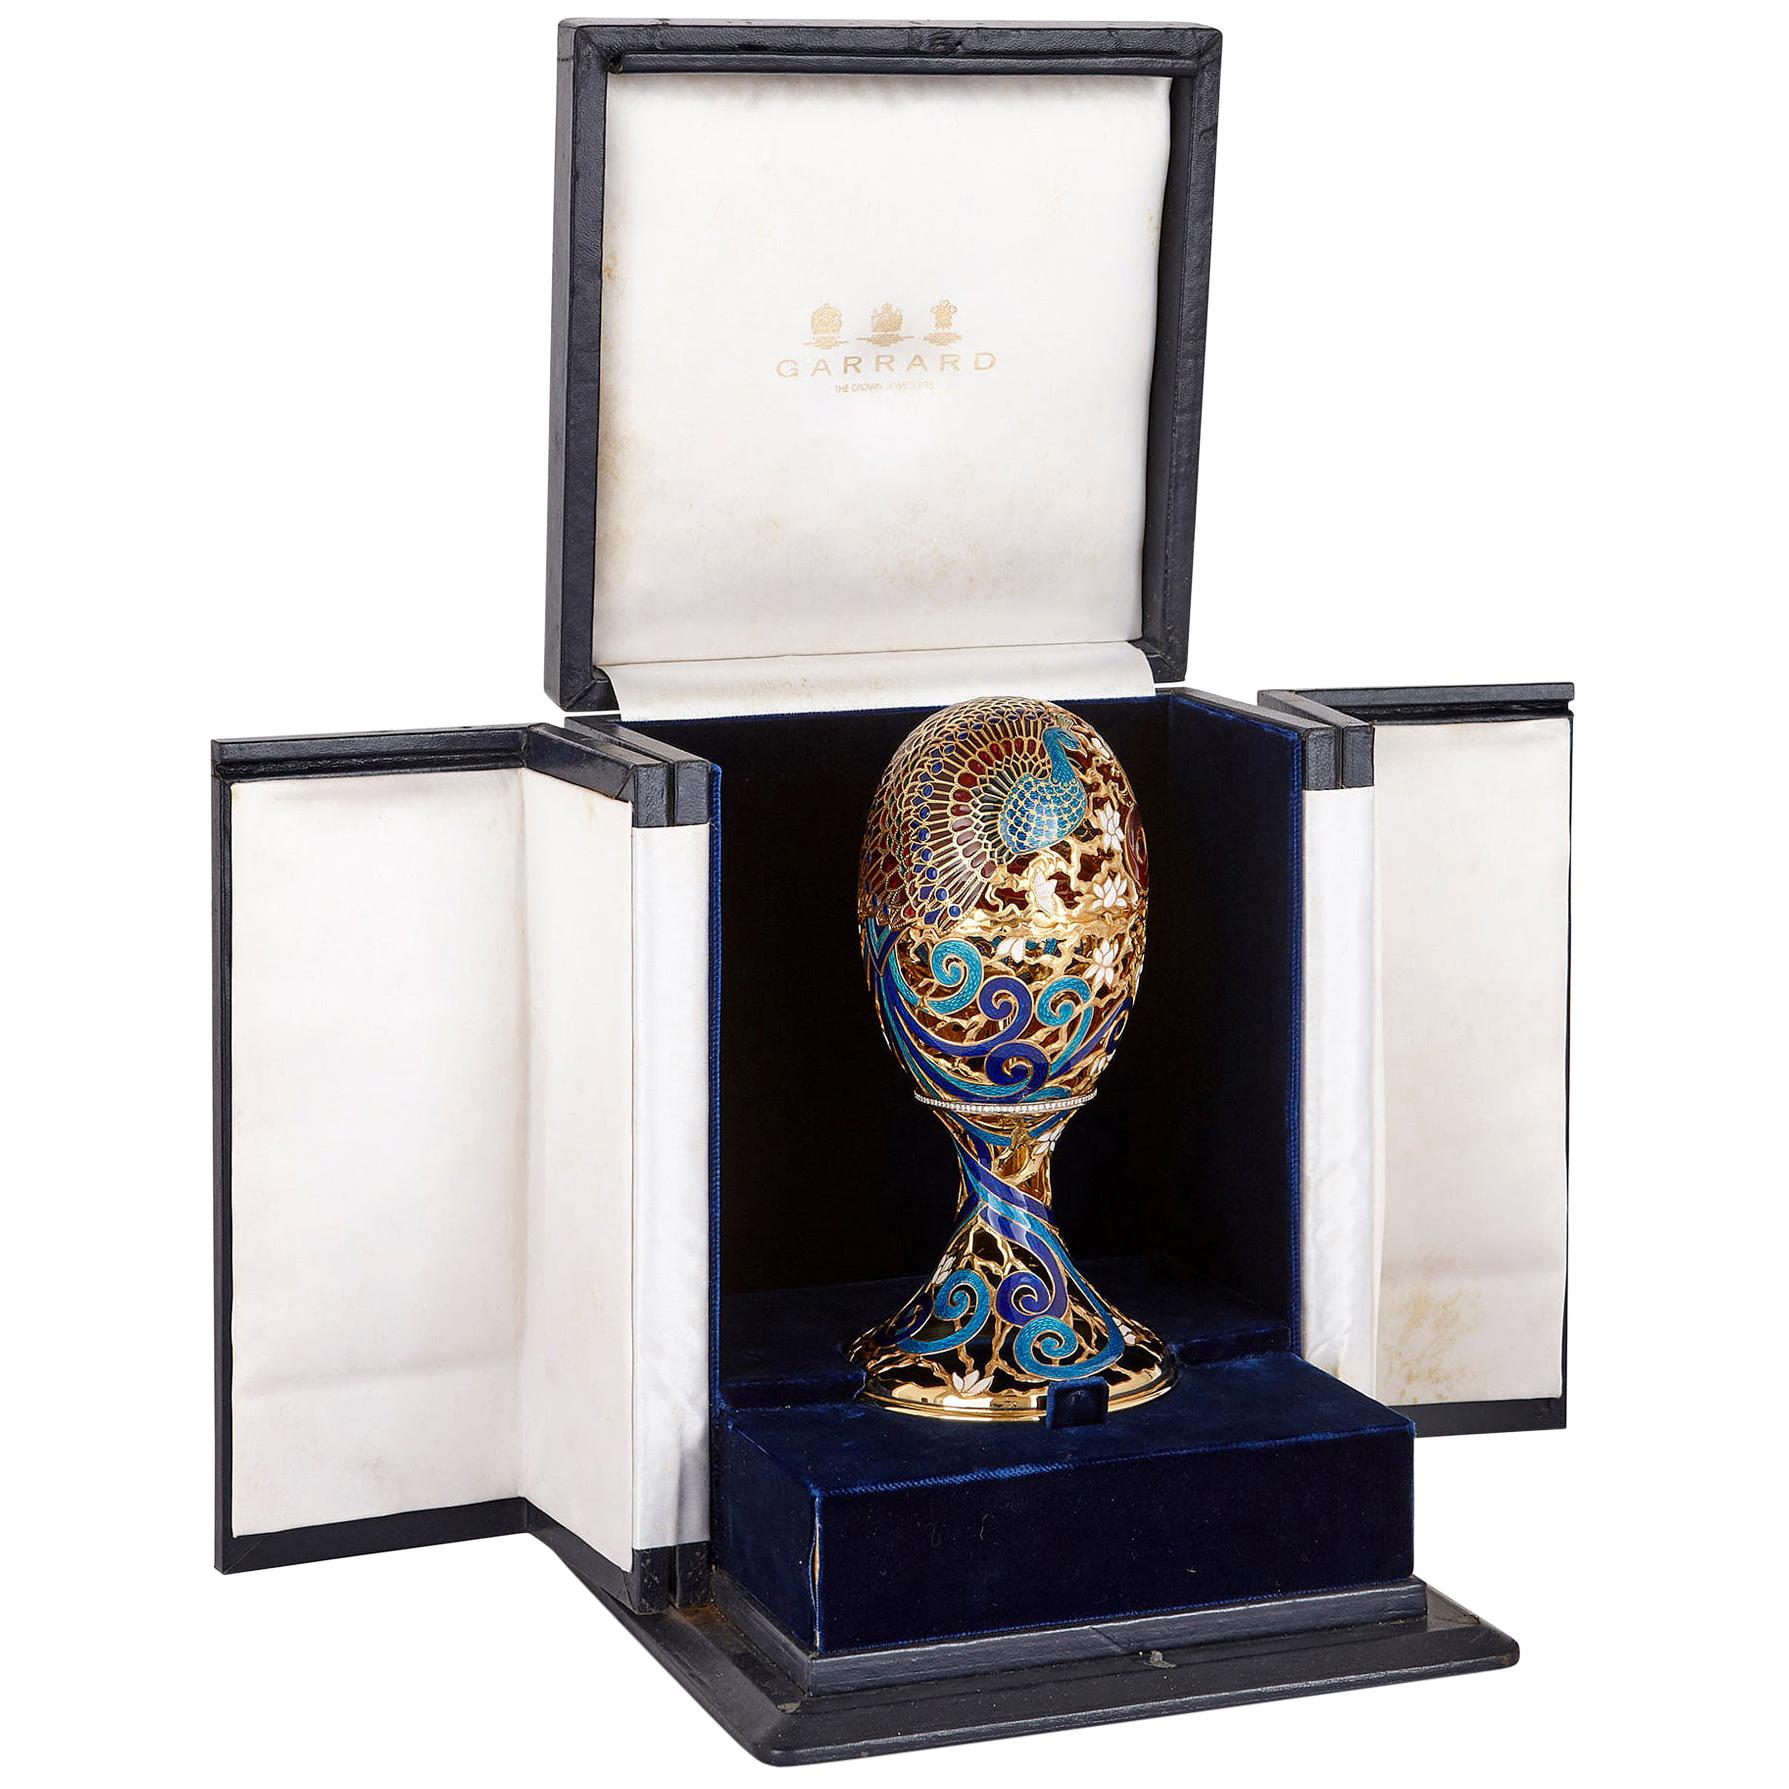 Fabergé Style Bejewelled and Enamelled Gold Egg by Asprey